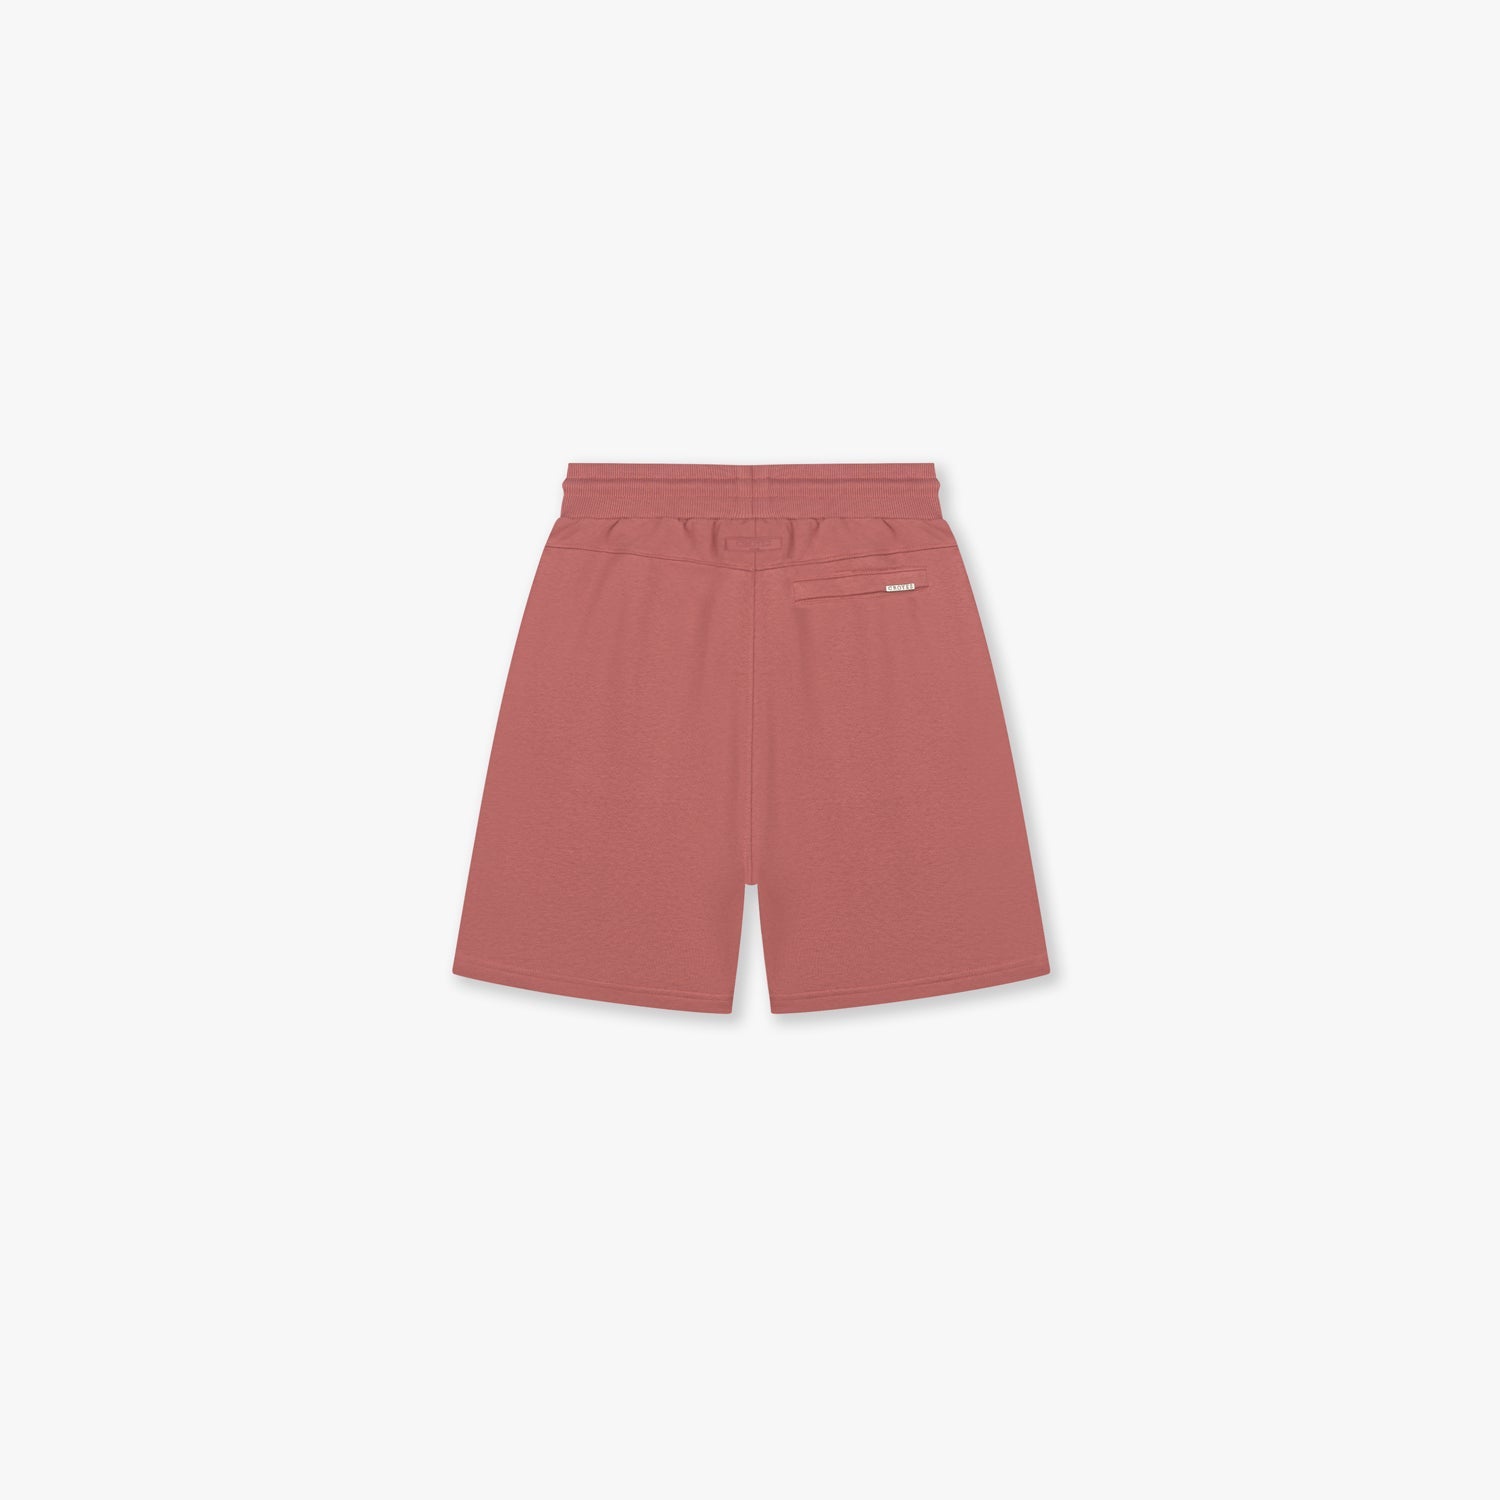 CROYEZ ABSTRACT SHORT - RED